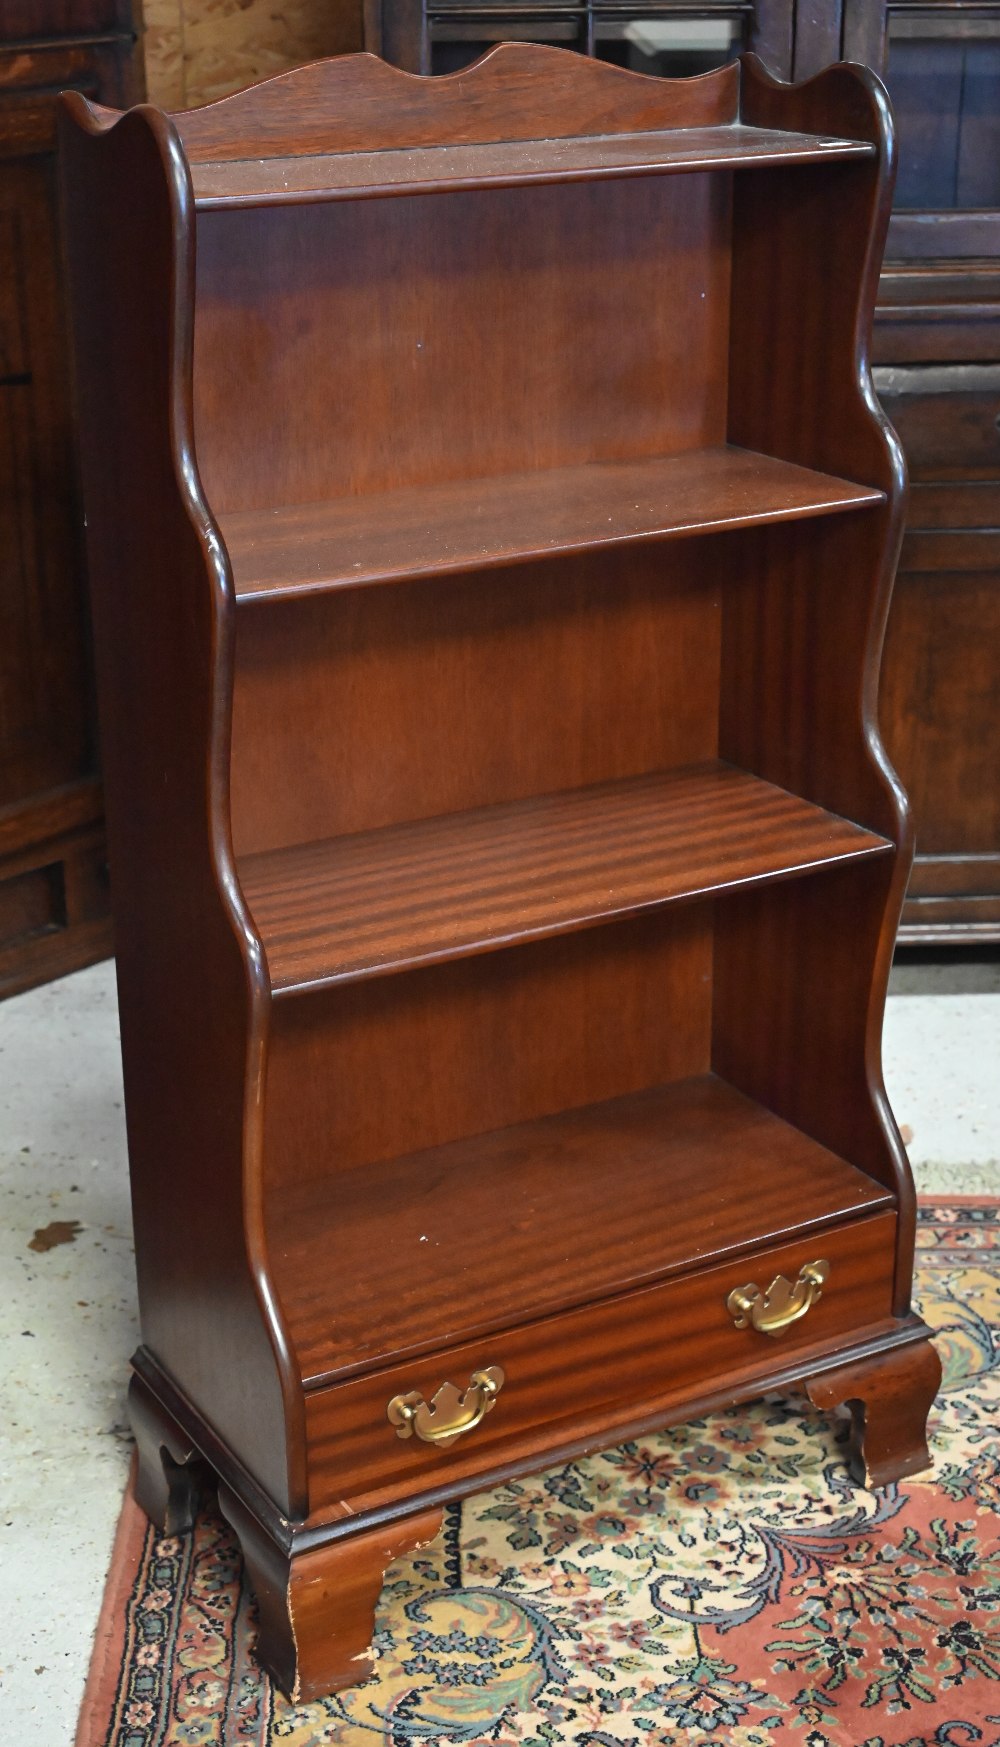 A reproduction mahogany waterfall bookcase with single drawer standing on bracket feet, 58 x 30 x